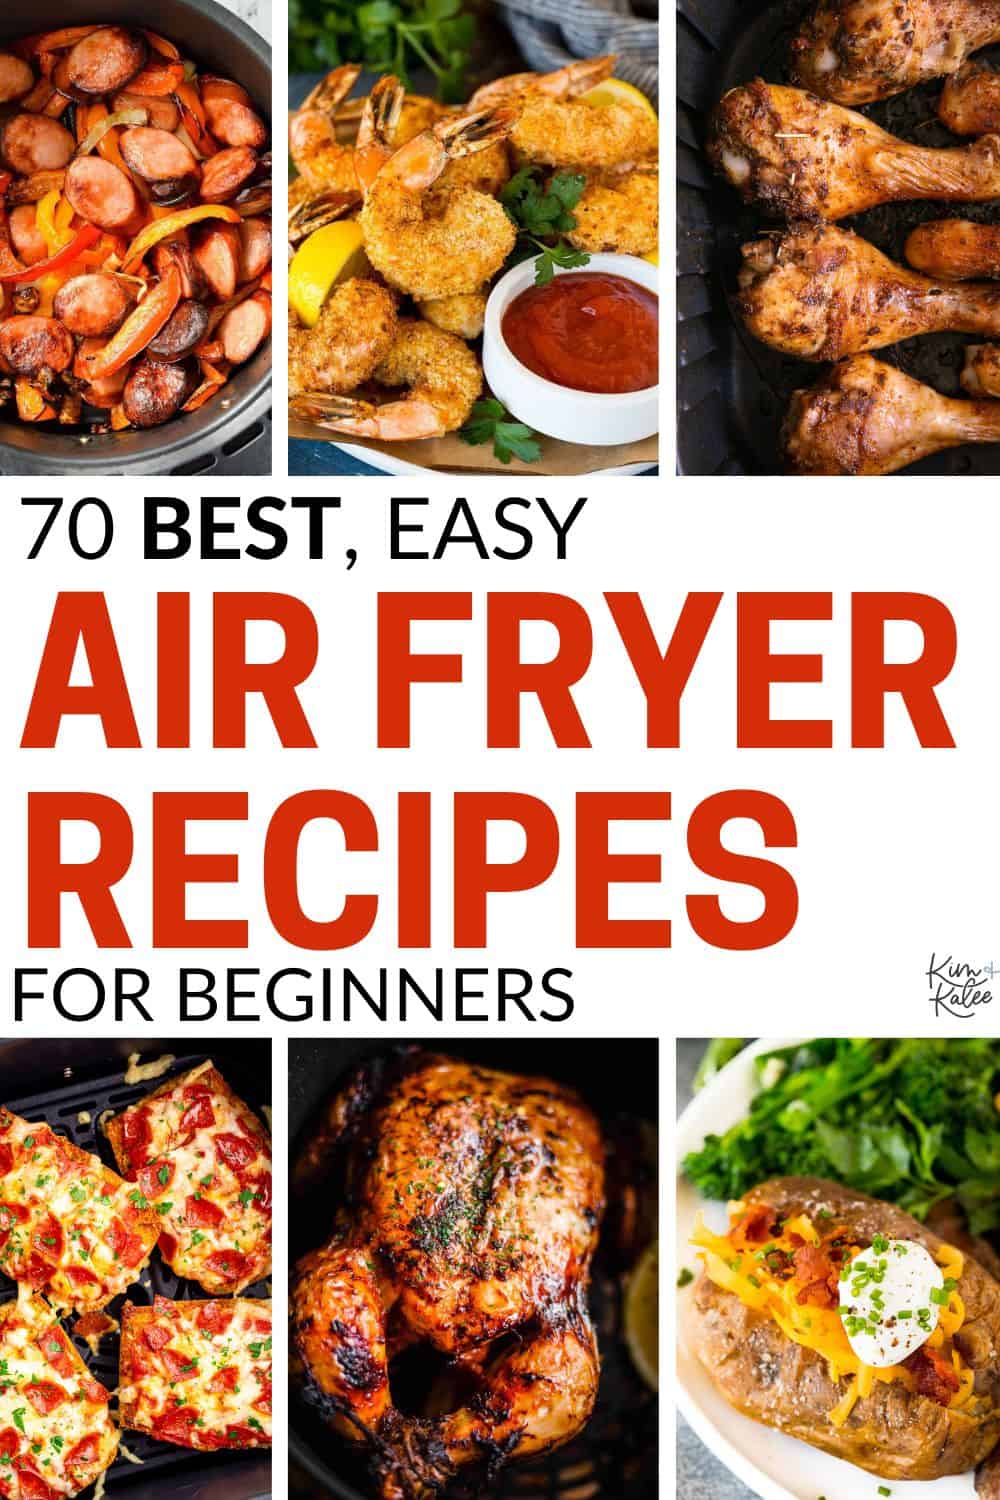 https://kimandkalee.com/wp-content/uploads/2023/05/easy-air-fryer-recipes-for-beginners-collage-1.jpg